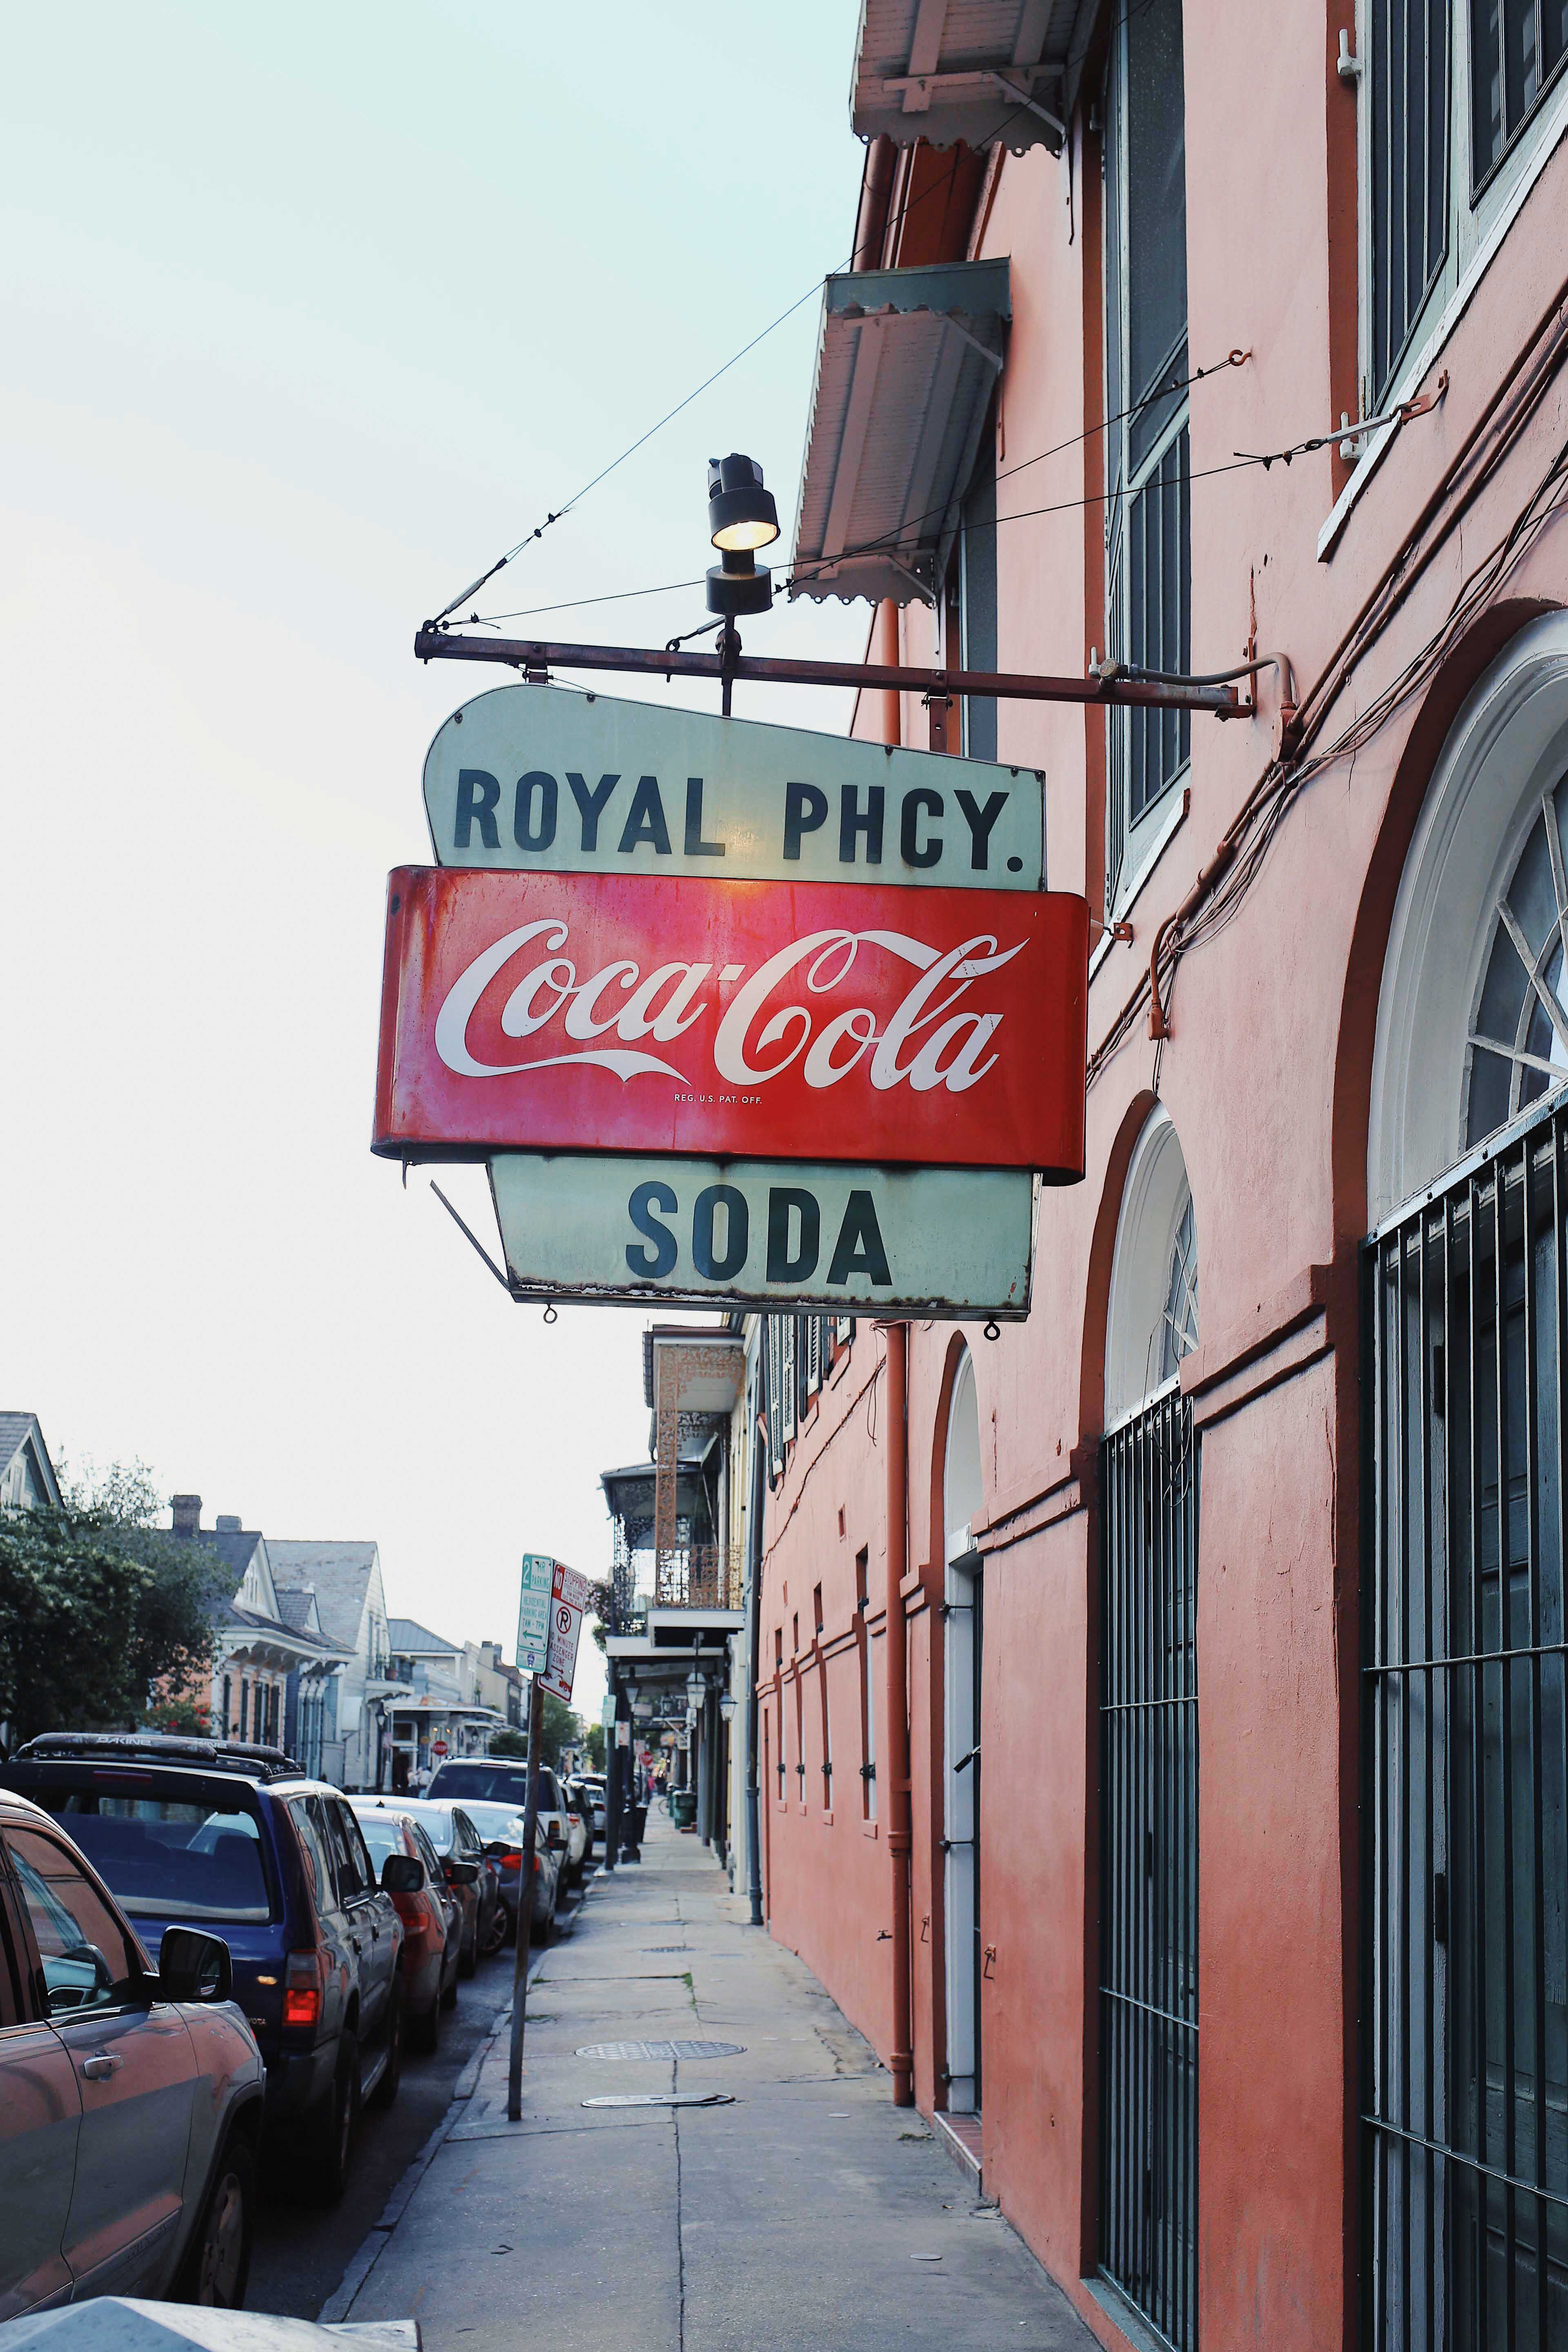 Royal Pharmacy meets Coca Cola - Visit of the French Quarter in New Orleans - Horse French Quarter New Orleans Travel Guide - NOLA City guide - by fashion blogger Julia Comil